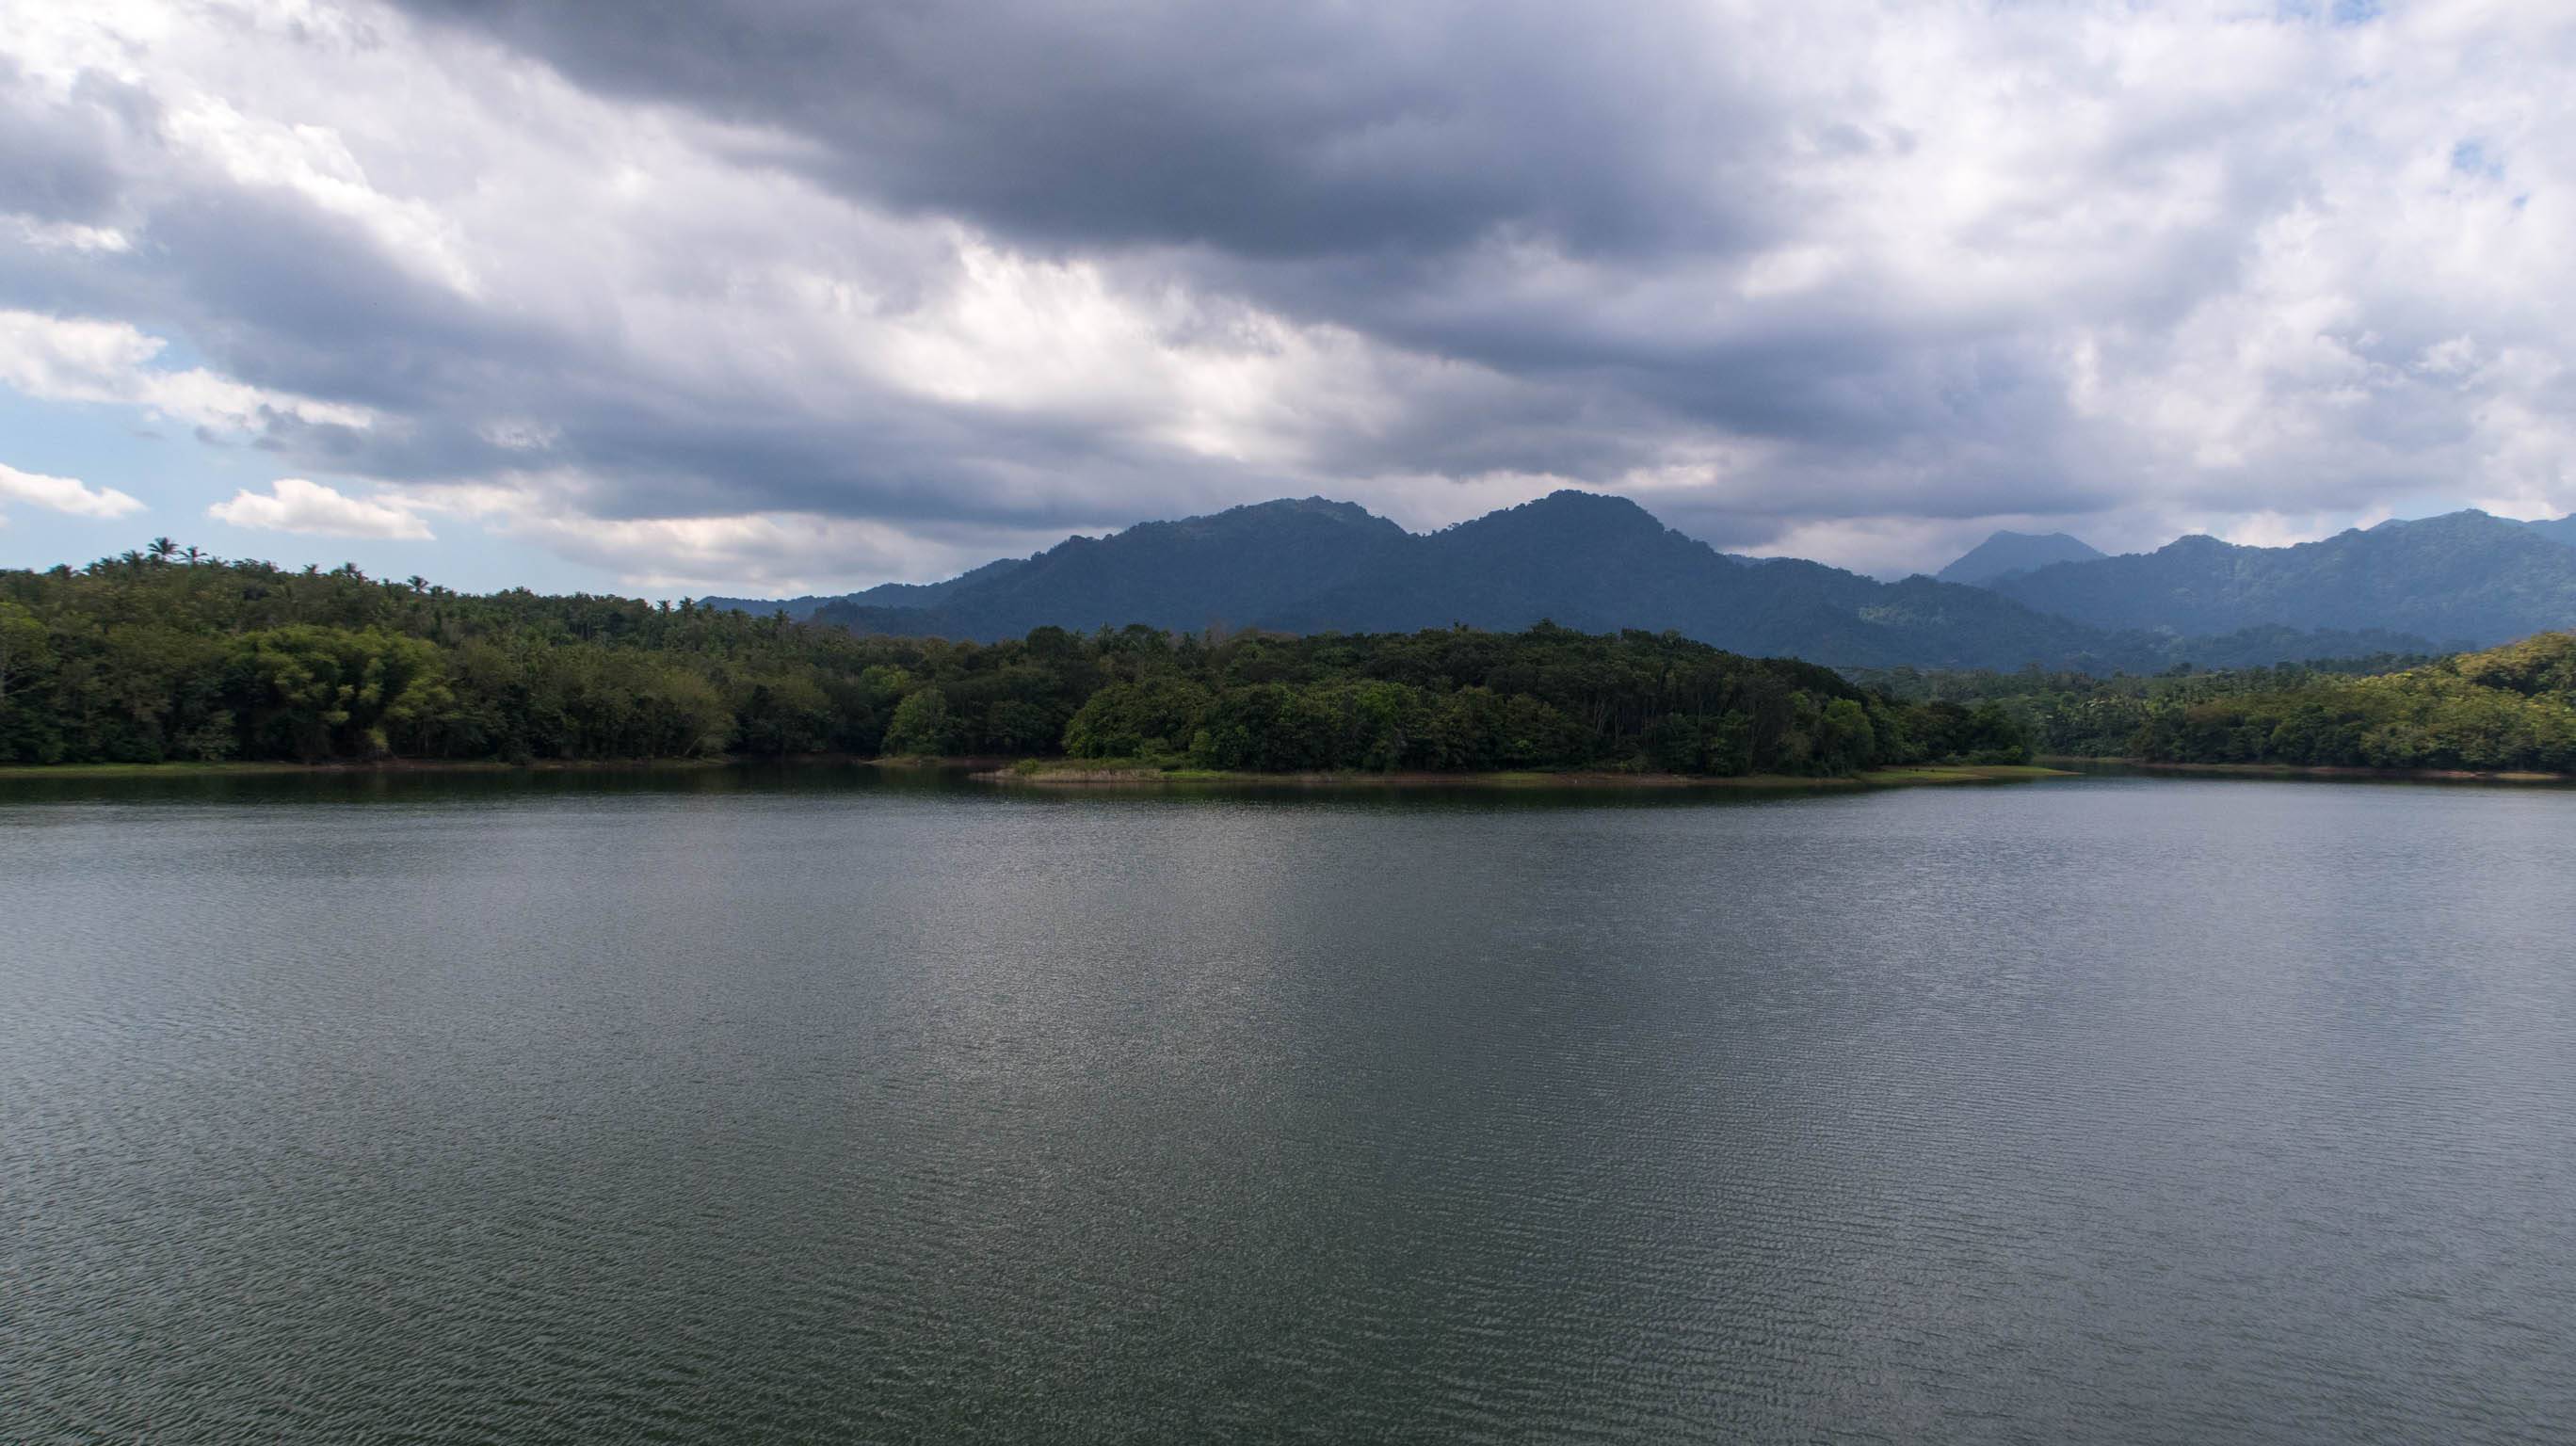 The view of Palasari Dam with forest and hills in the background.